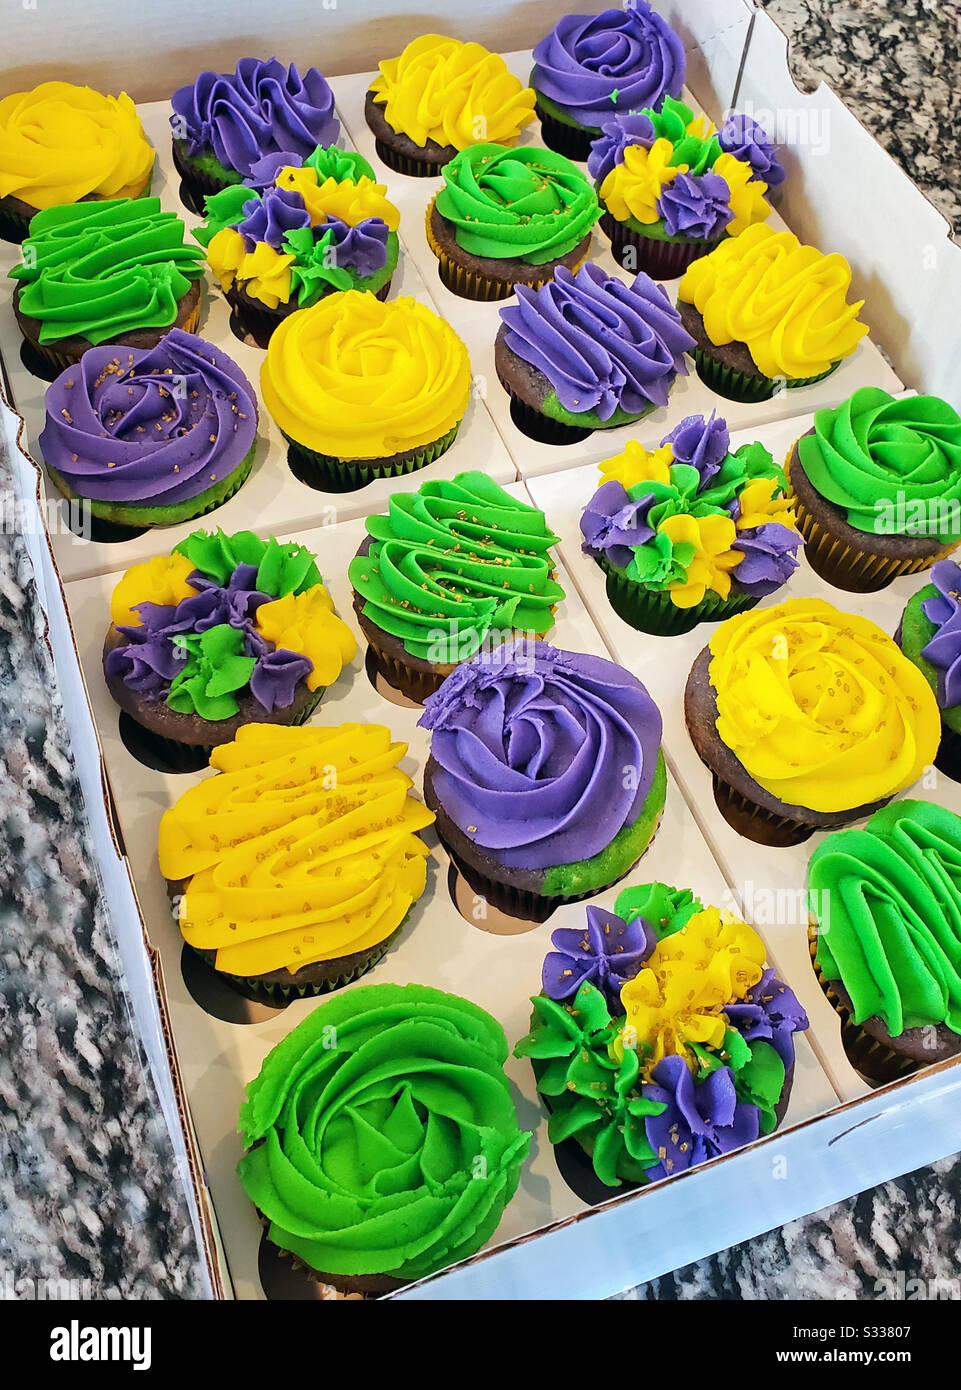 Two dozen colorful, purple, lime green and golden yellow Mardi Gras, chocolate, cupcakes in a bakery box. Stock Photo